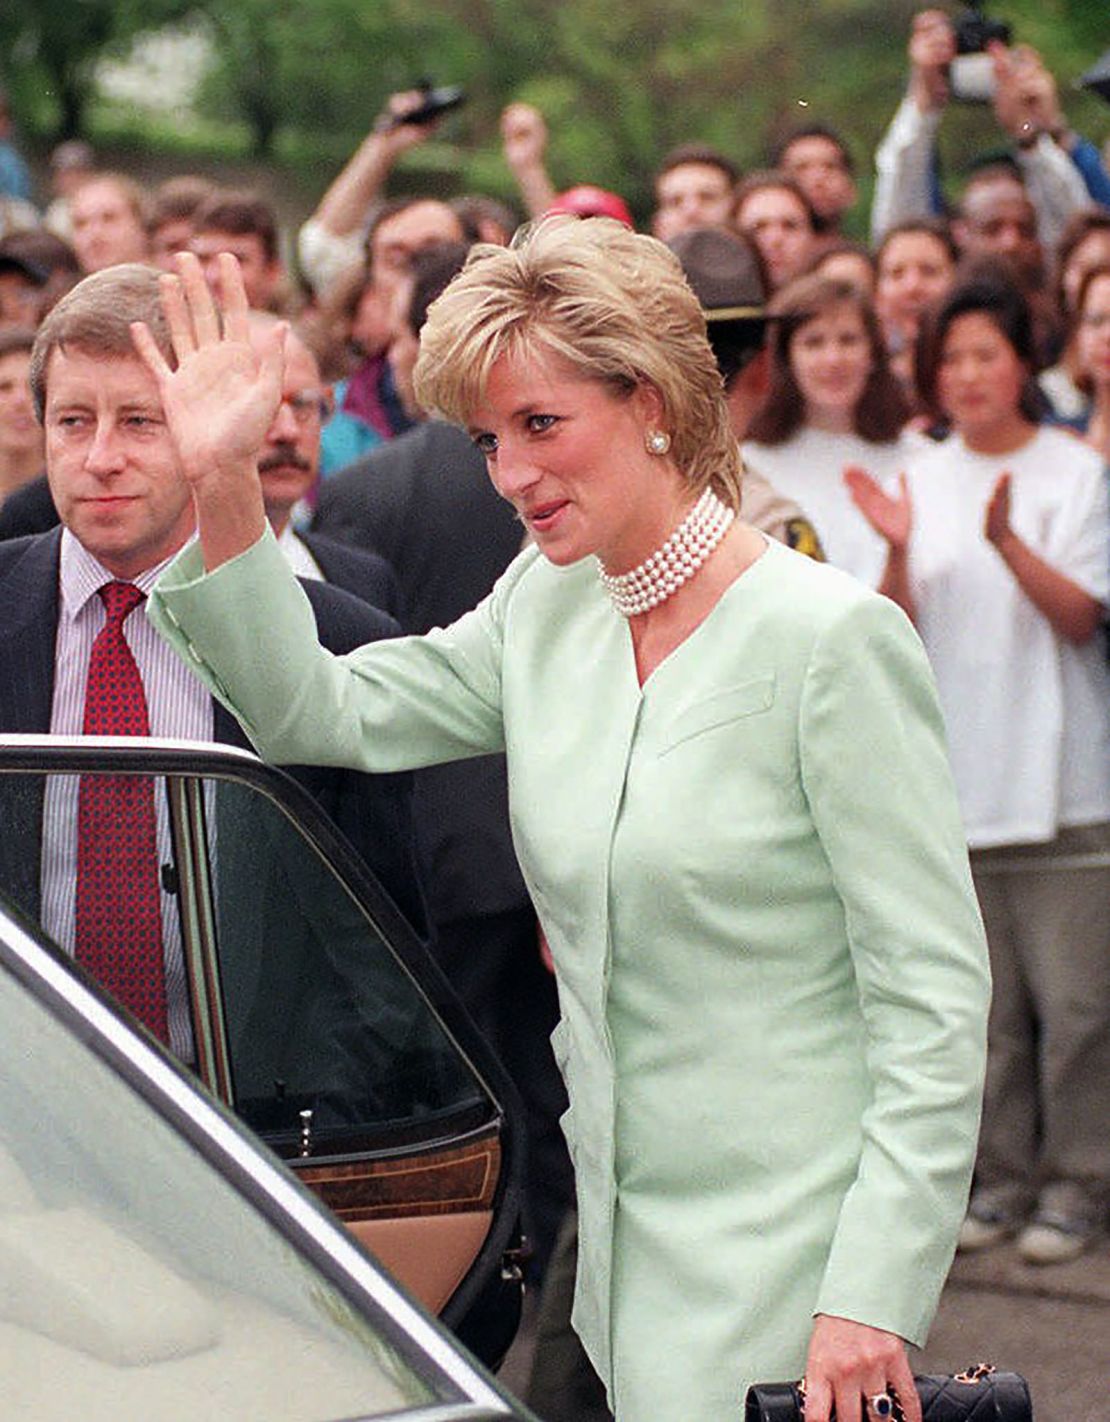 Princess Diana waves to cheering crowds as she visits Northwestern University in Chicago in June 1996.